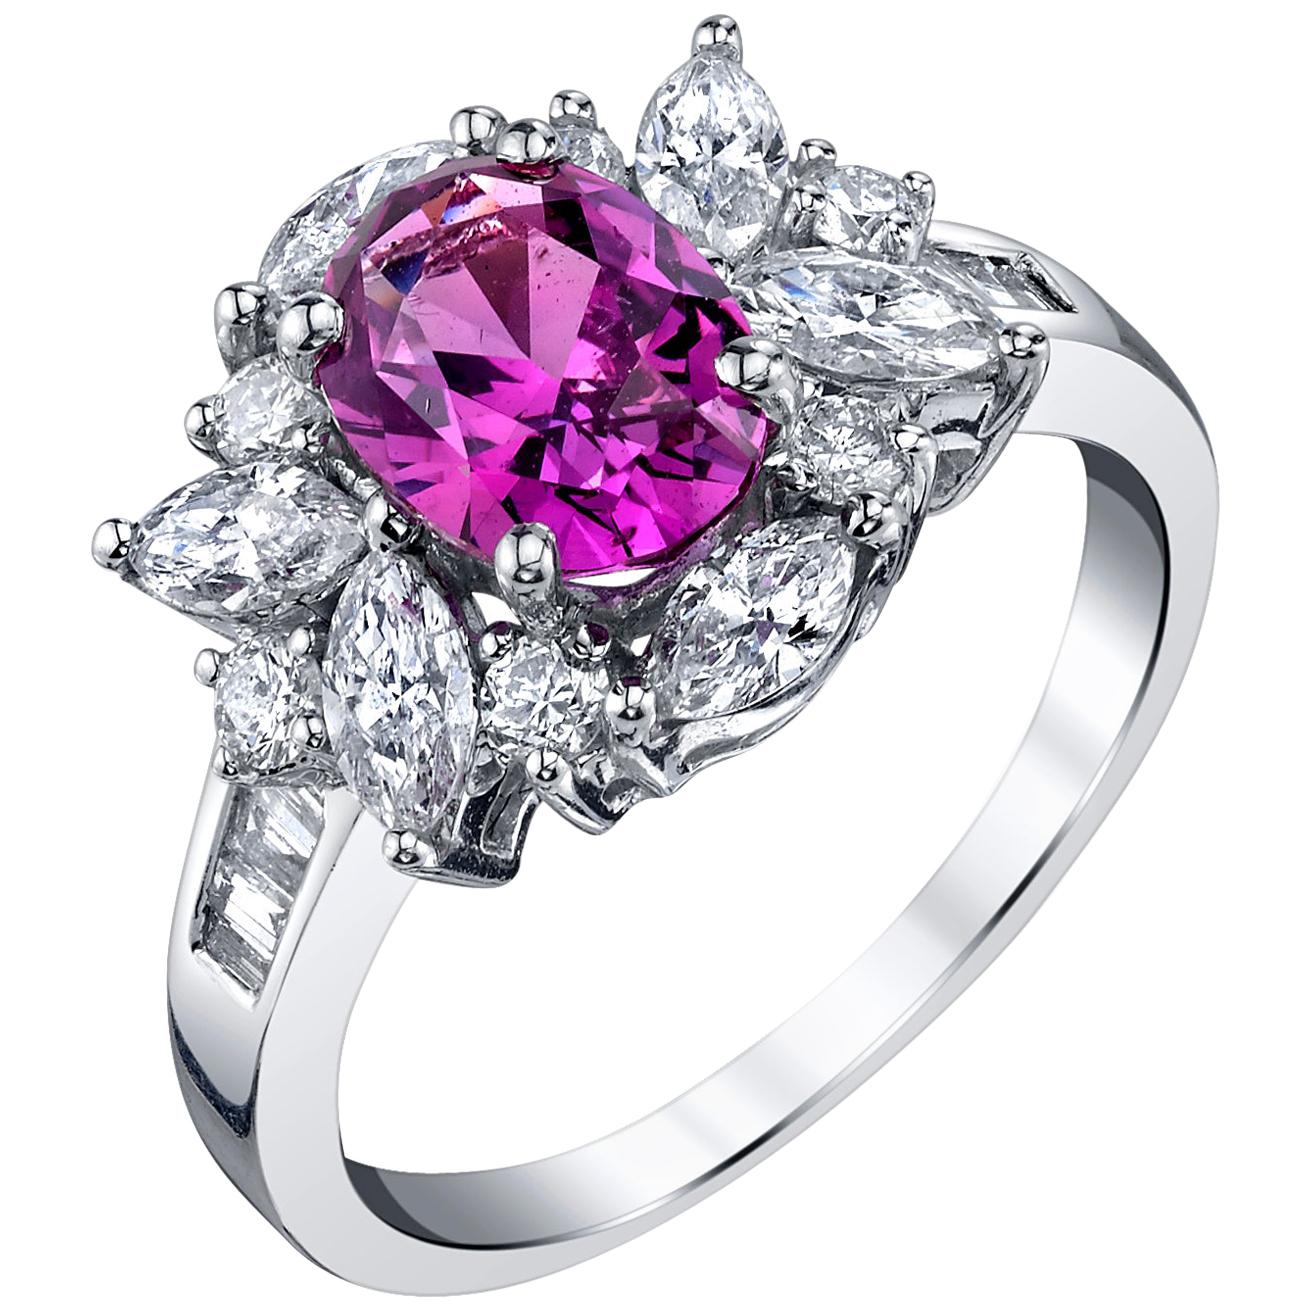 2.27 ct. Hot Pink Sapphire Oval, Diamond Marquise 18k White Gold Cocktail Ring